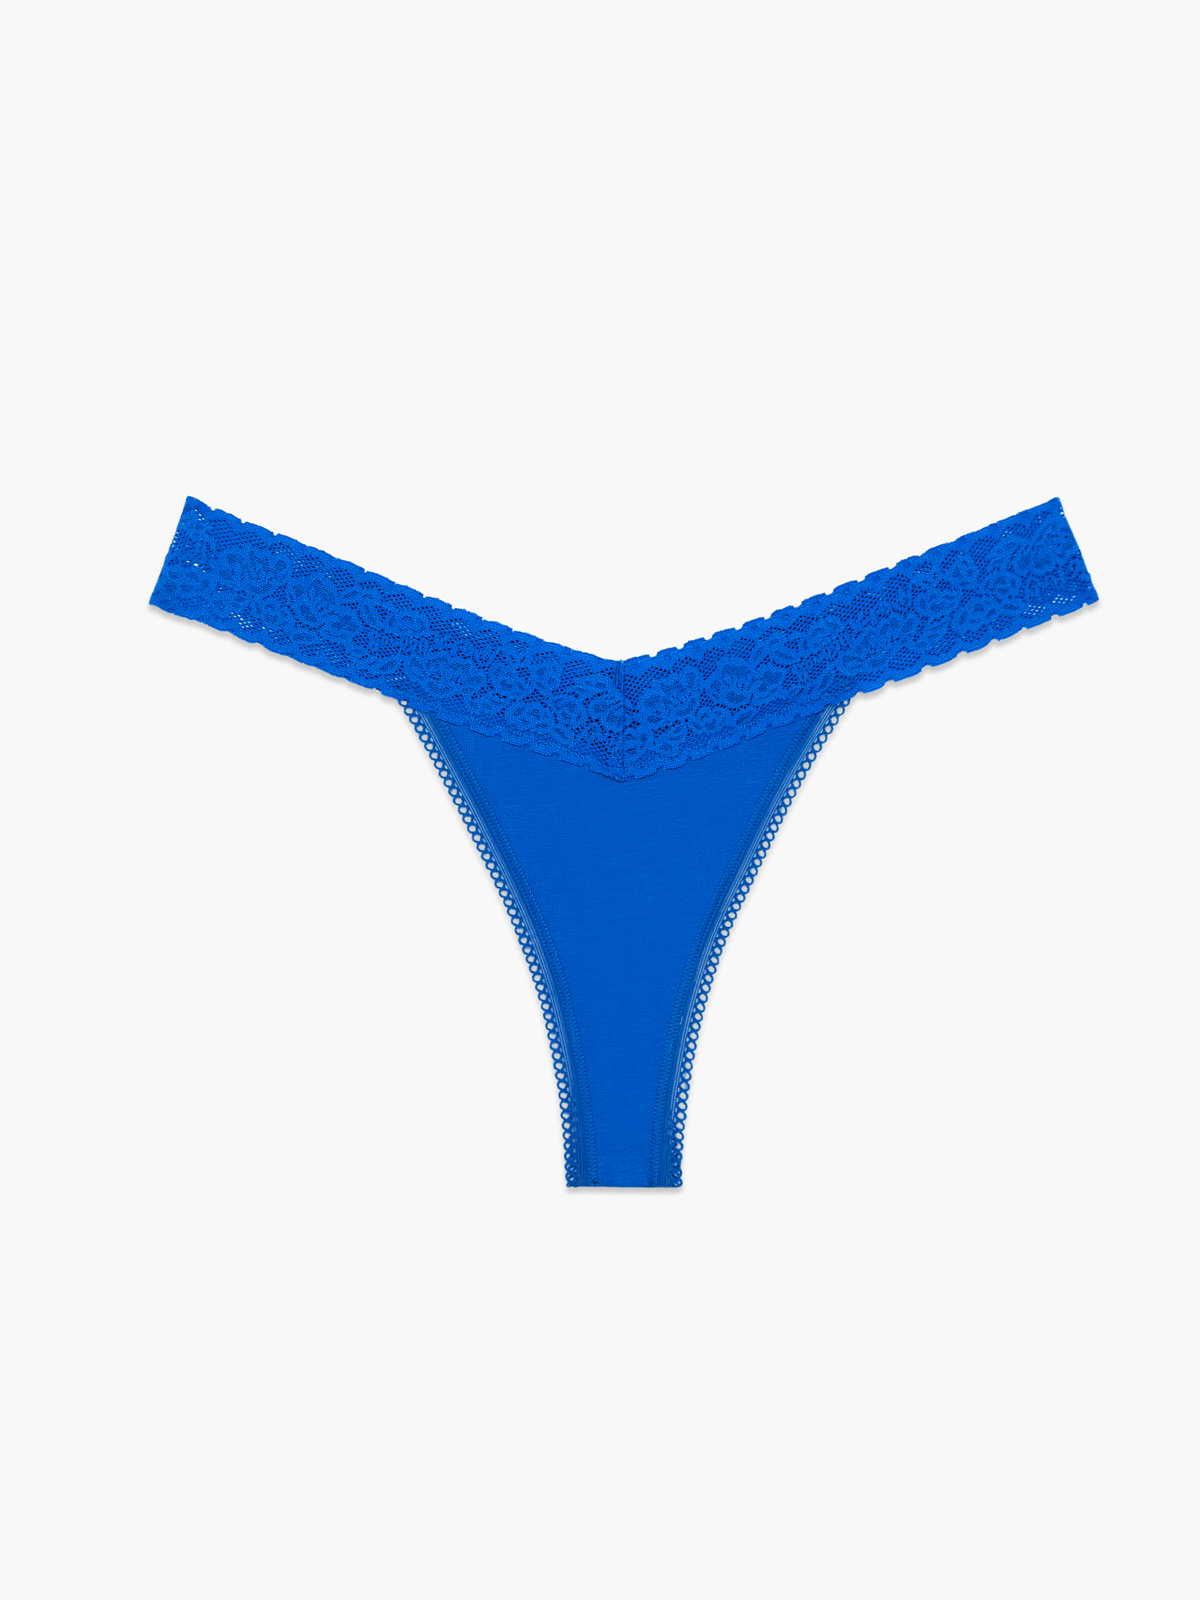 https://cdn.savagex.com/media/images/products/UD2042661-6830/COTTON-ESSENTIALS-LACE-TRIM-THONG-PANTY-UD2042661-6830-LAYDOWN-1200x1600.jpg